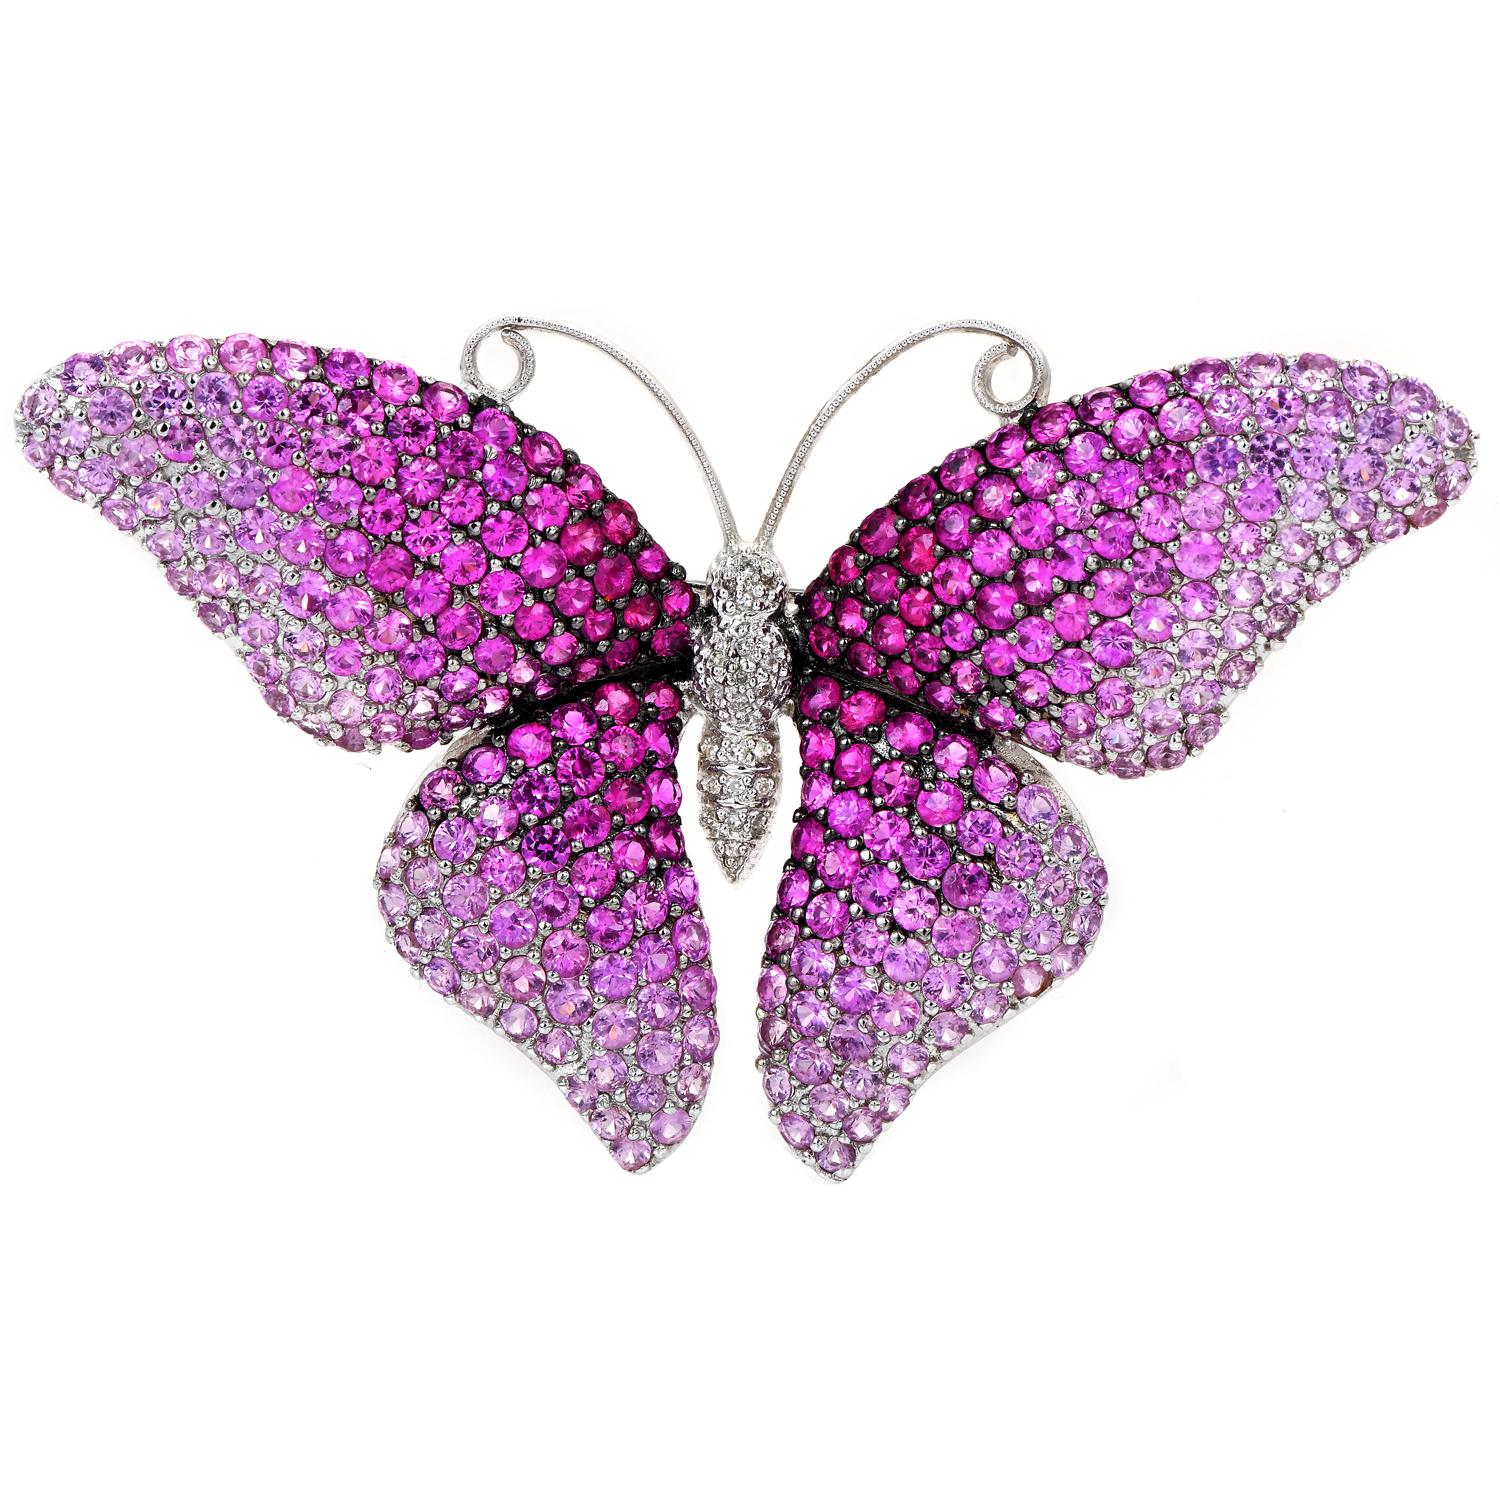 This exquisite Estate Pink Sapphire butterfly pin and pendant is crafted in solid 18K white gold. Its body is covered with Round-cut genuine Round-cut pink sapphire in various tones of color This sweet brooch pin and pendant will be a joy to own,